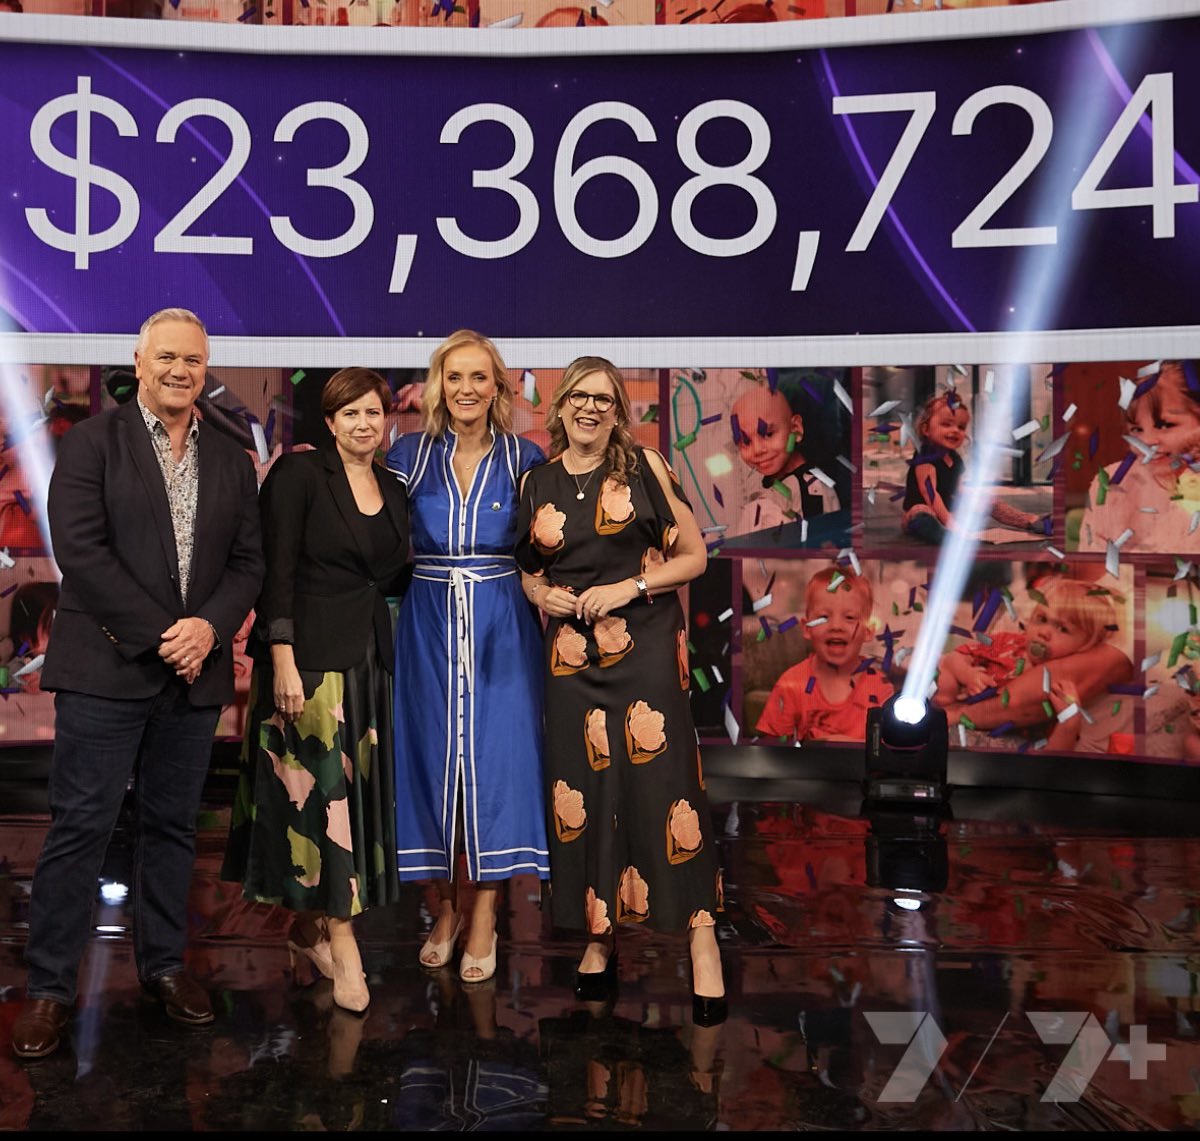 Thanks to the support of the community, the 2024 @GoodFriAppeal has raised $23,368,724 for the @rchmelbourne Thank you to everyone who donated and participated today. You can still donate to the Appeal online at goodfridayappeal.com.au #goodfridayappeal #giveforthekids